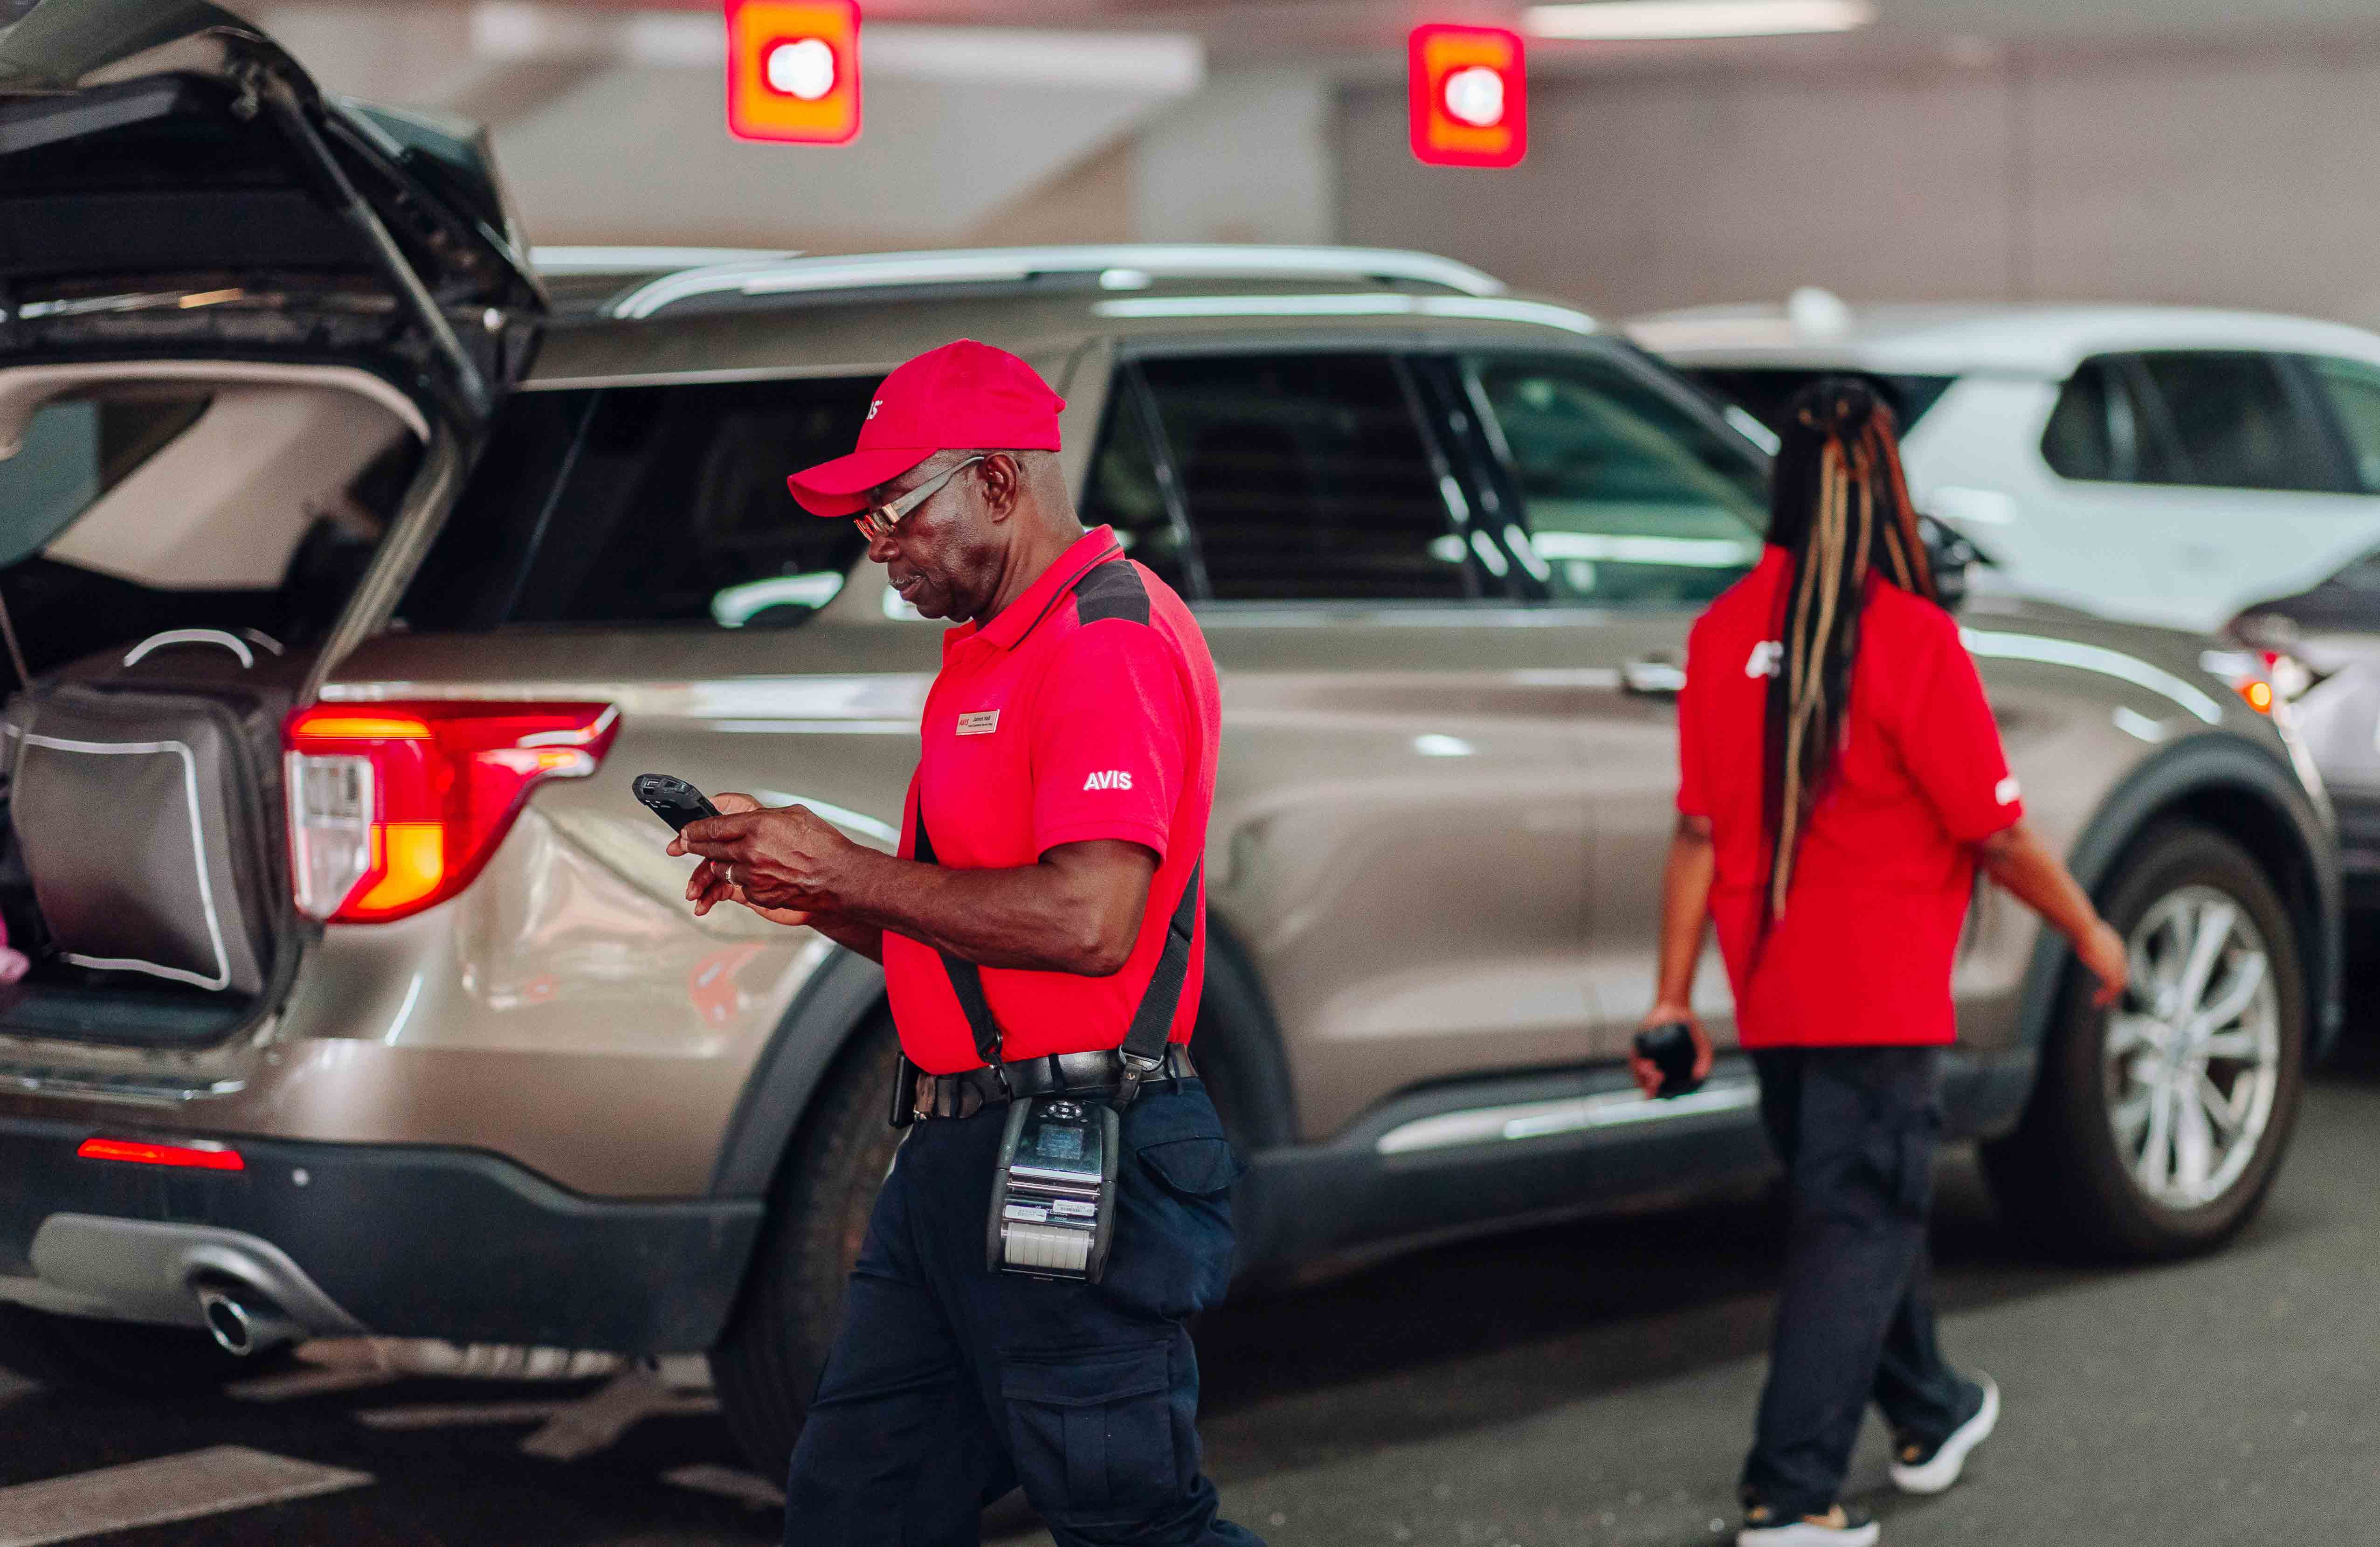 Avis staffers at work in a rental station car park area